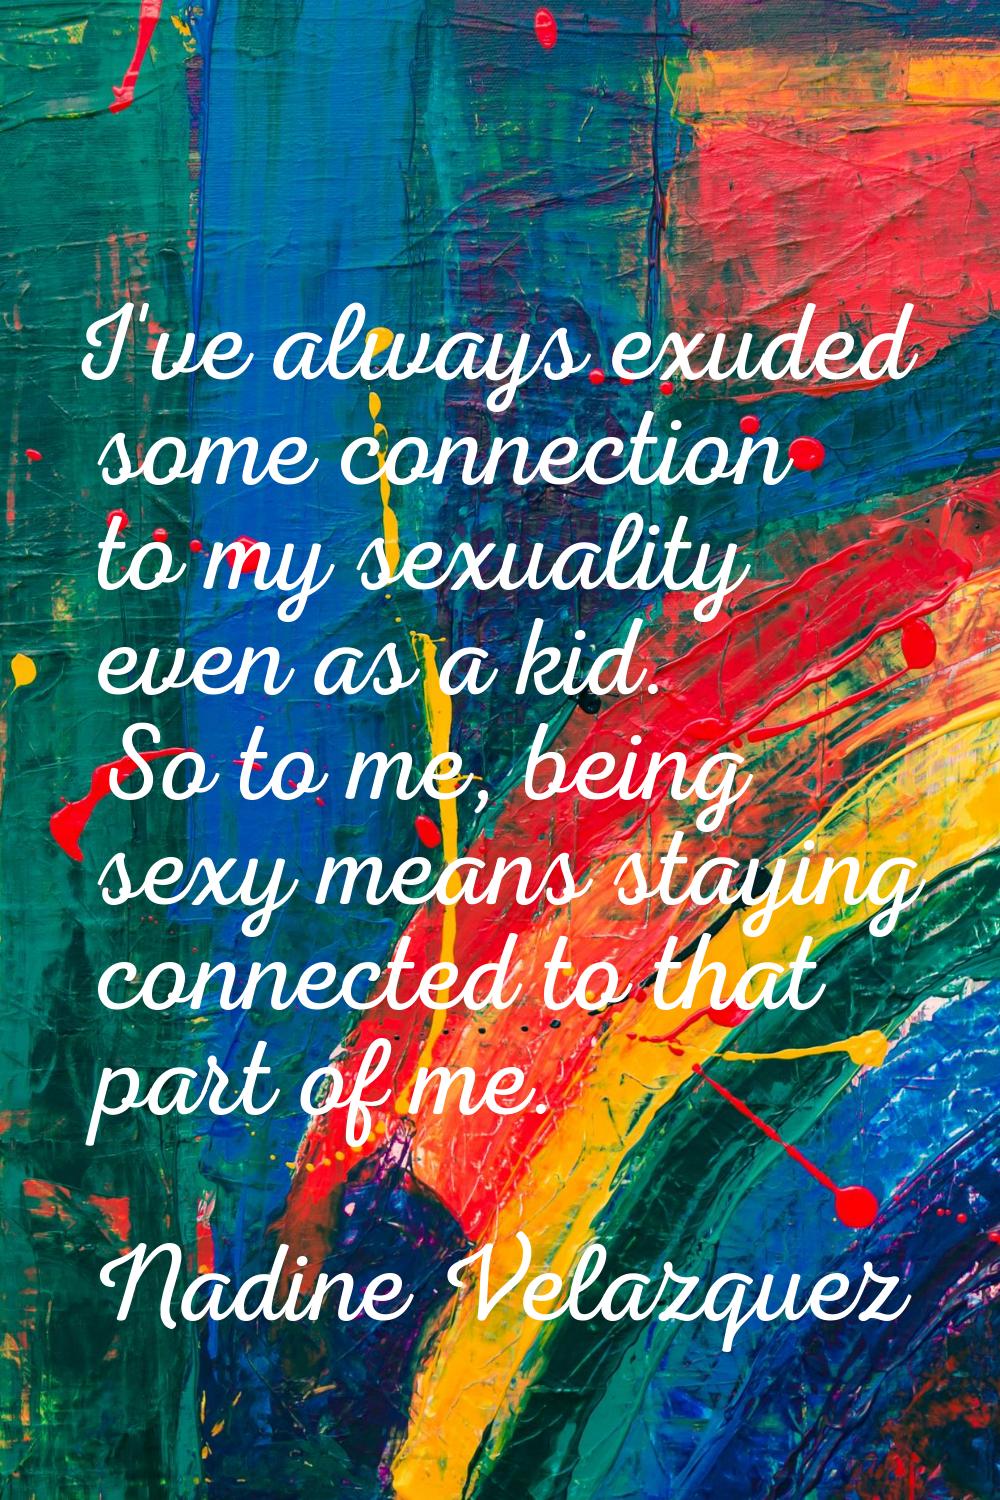 I've always exuded some connection to my sexuality even as a kid. So to me, being sexy means stayin